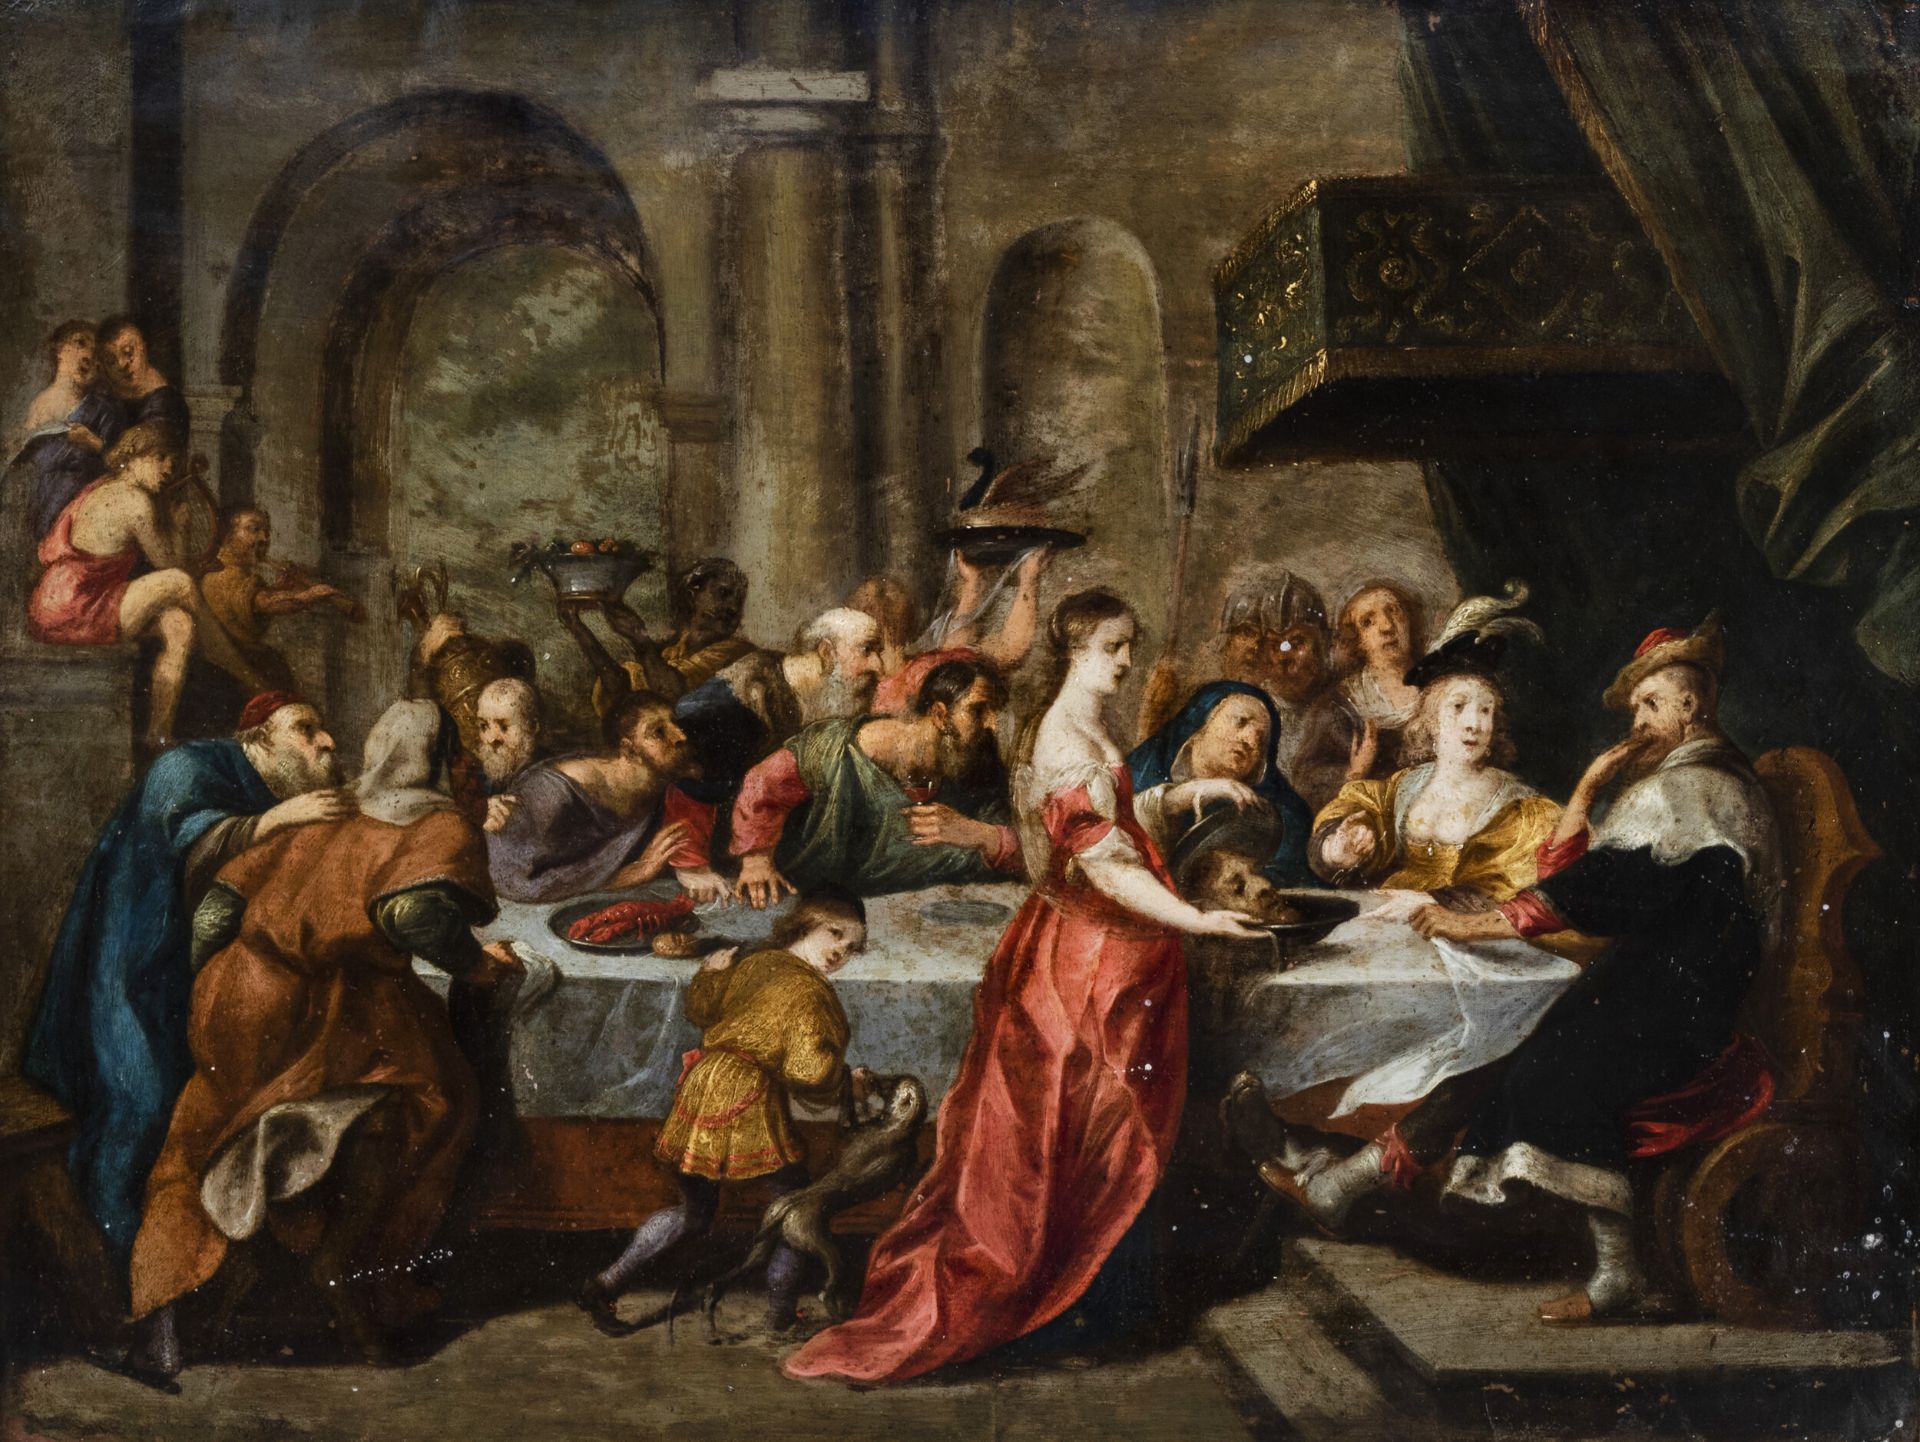 Flemish school, in the manner of Simon De Vos (1603-1676): The feast of Herod, 17th C.